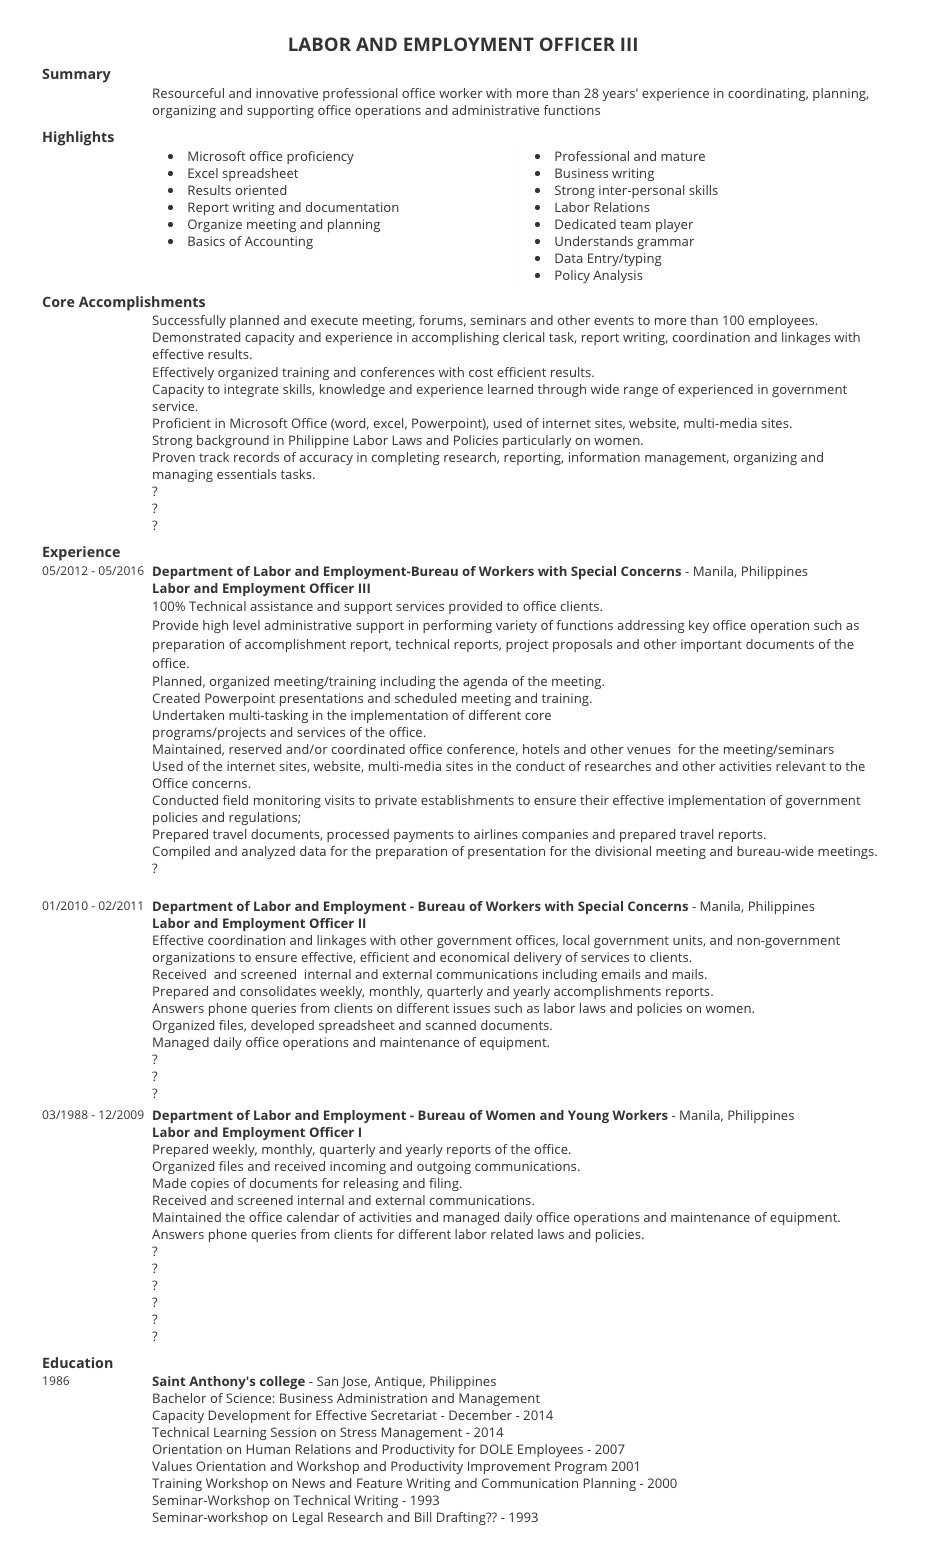 Sample Resume with Civil Service Eligibility Resume Samples for Government Job Application In the Philippines